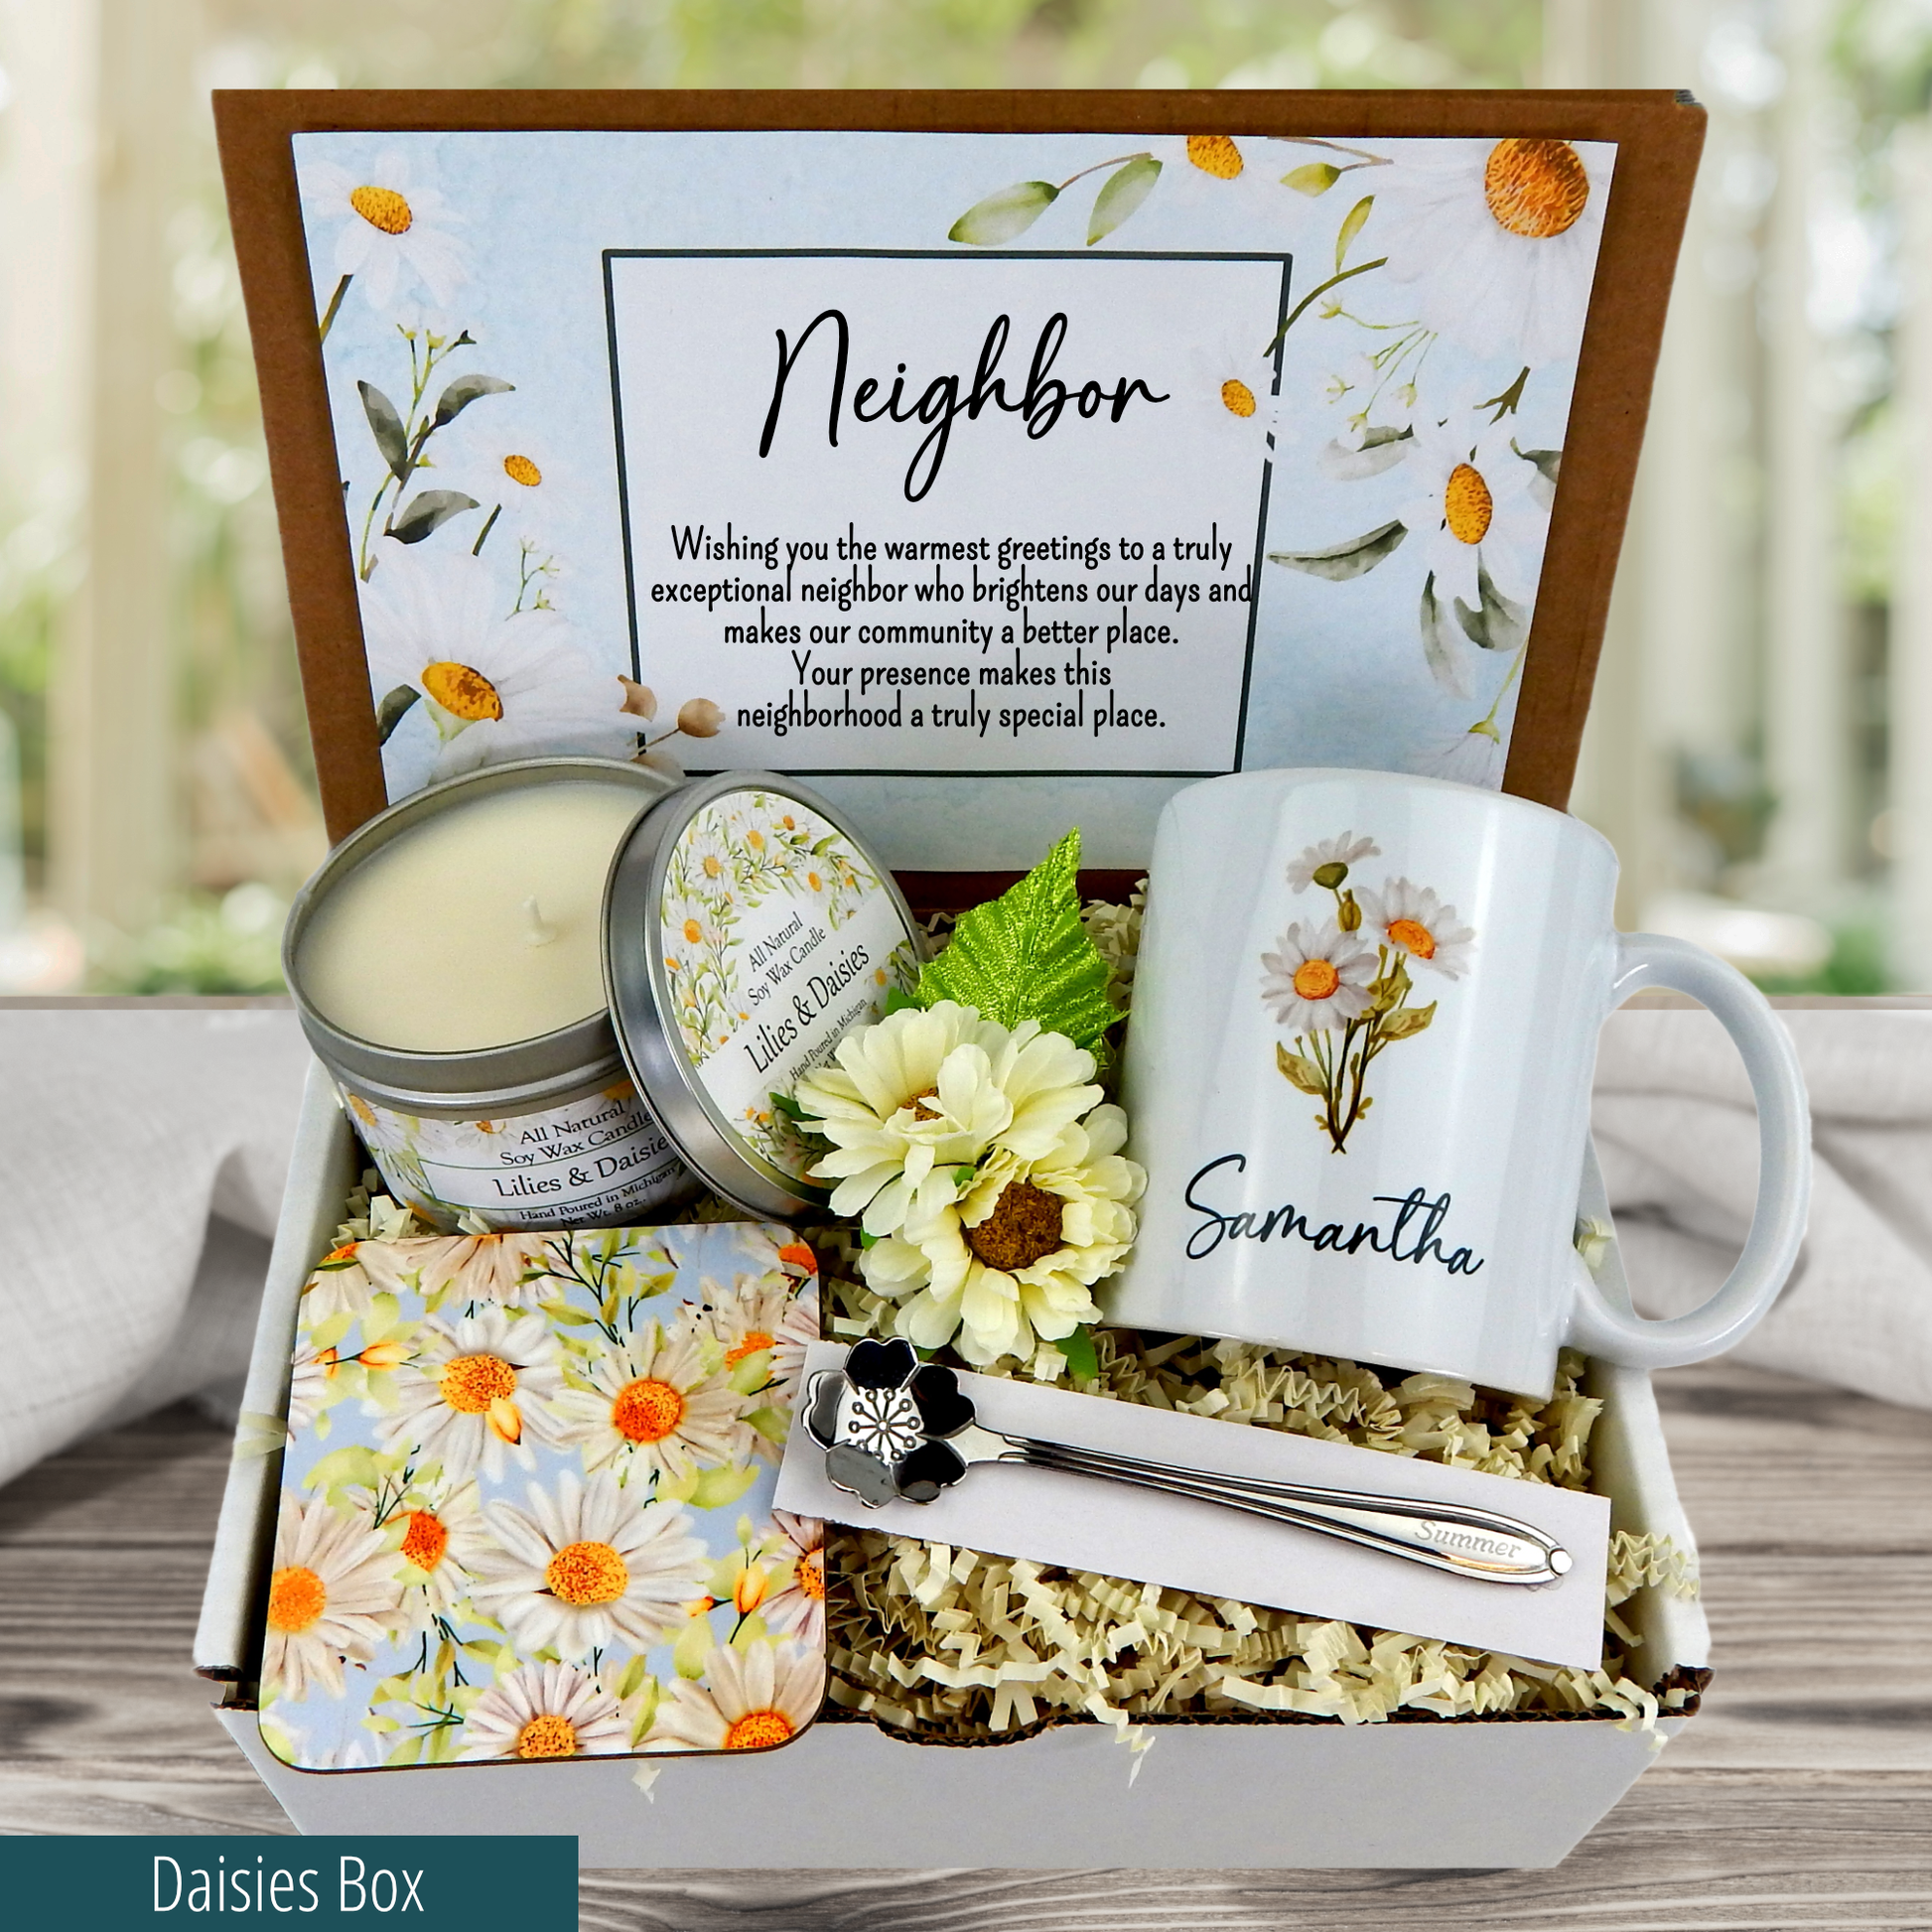 daisy themed Personalized Welcome Gift Basket with Mug, Spoon, and Candle for Neighbor